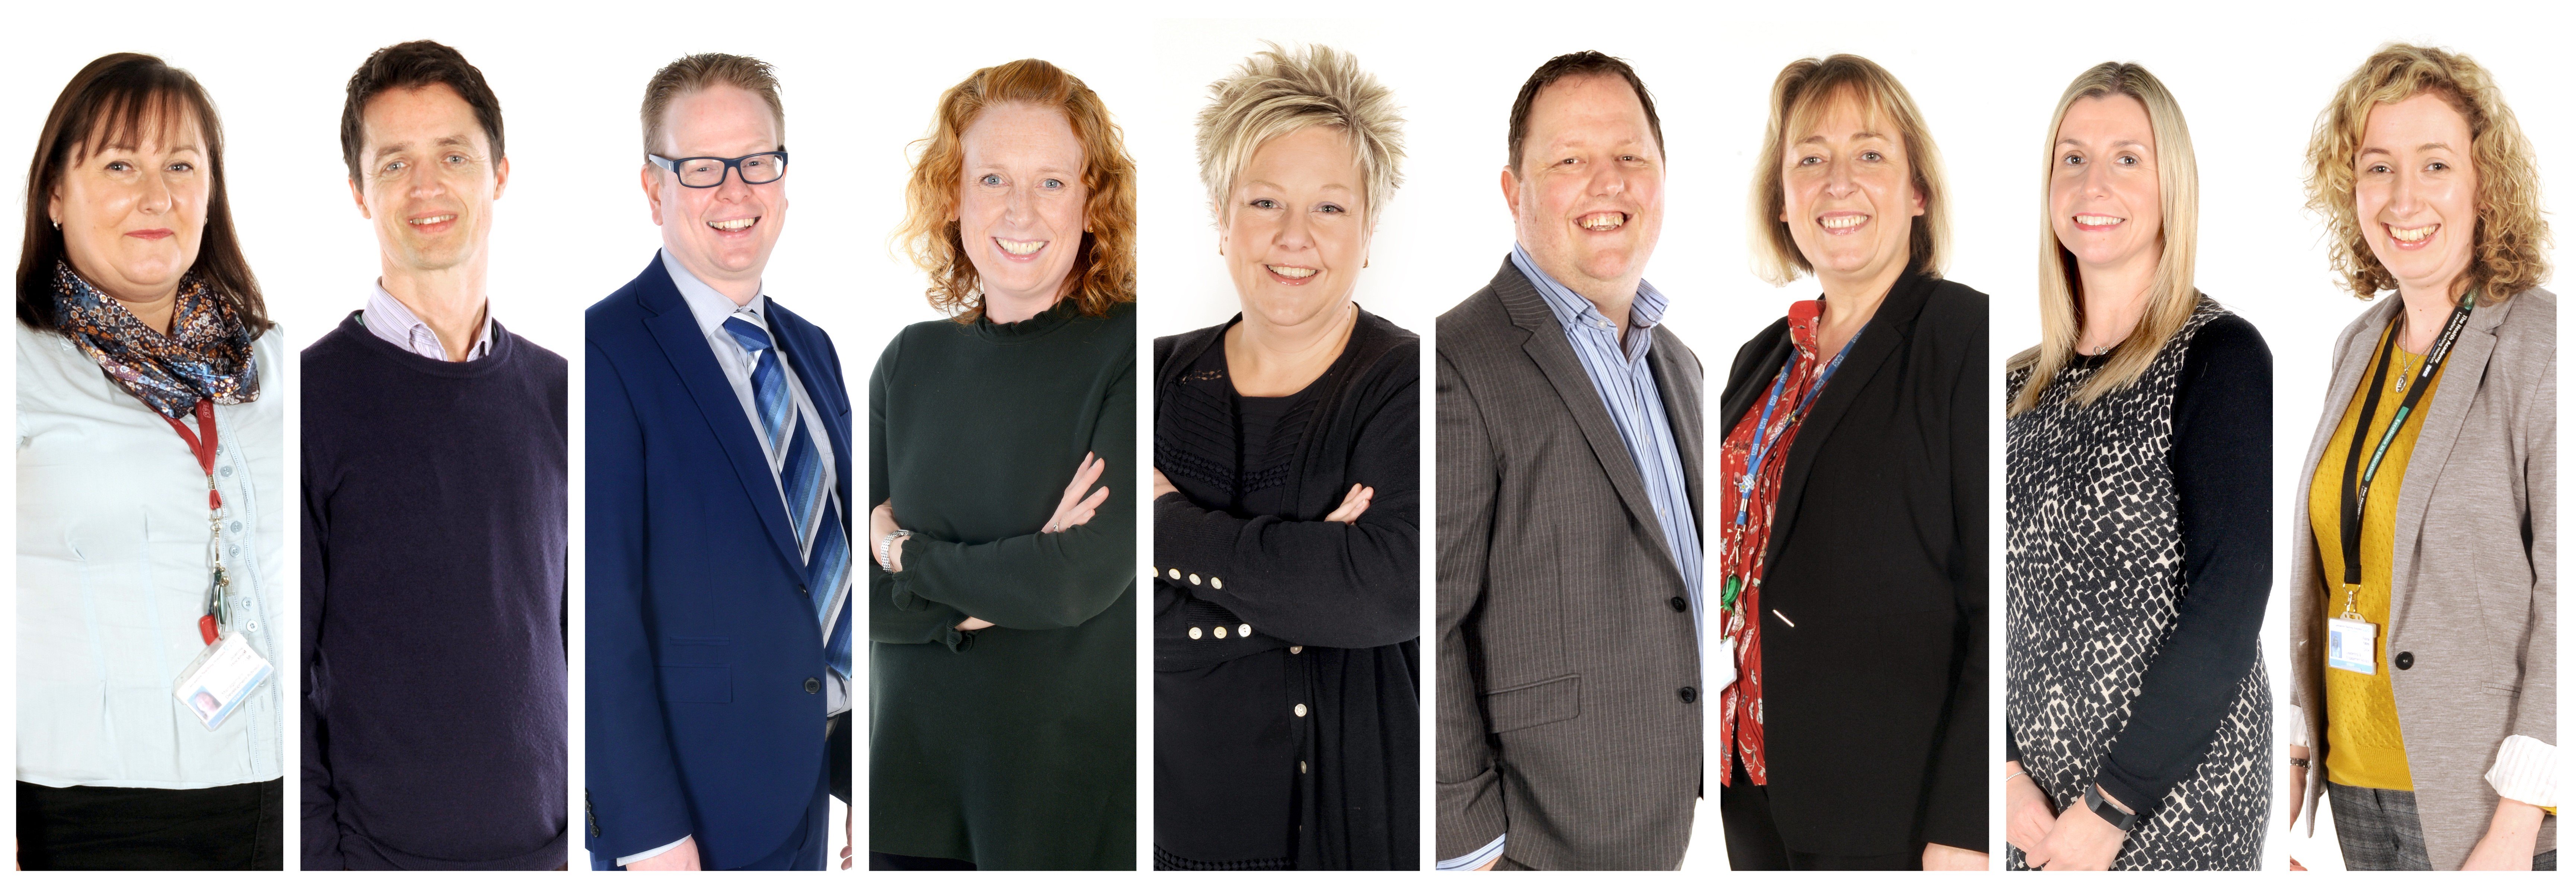 Innovative organisational development team and the 'rising stars’ initiative featured image